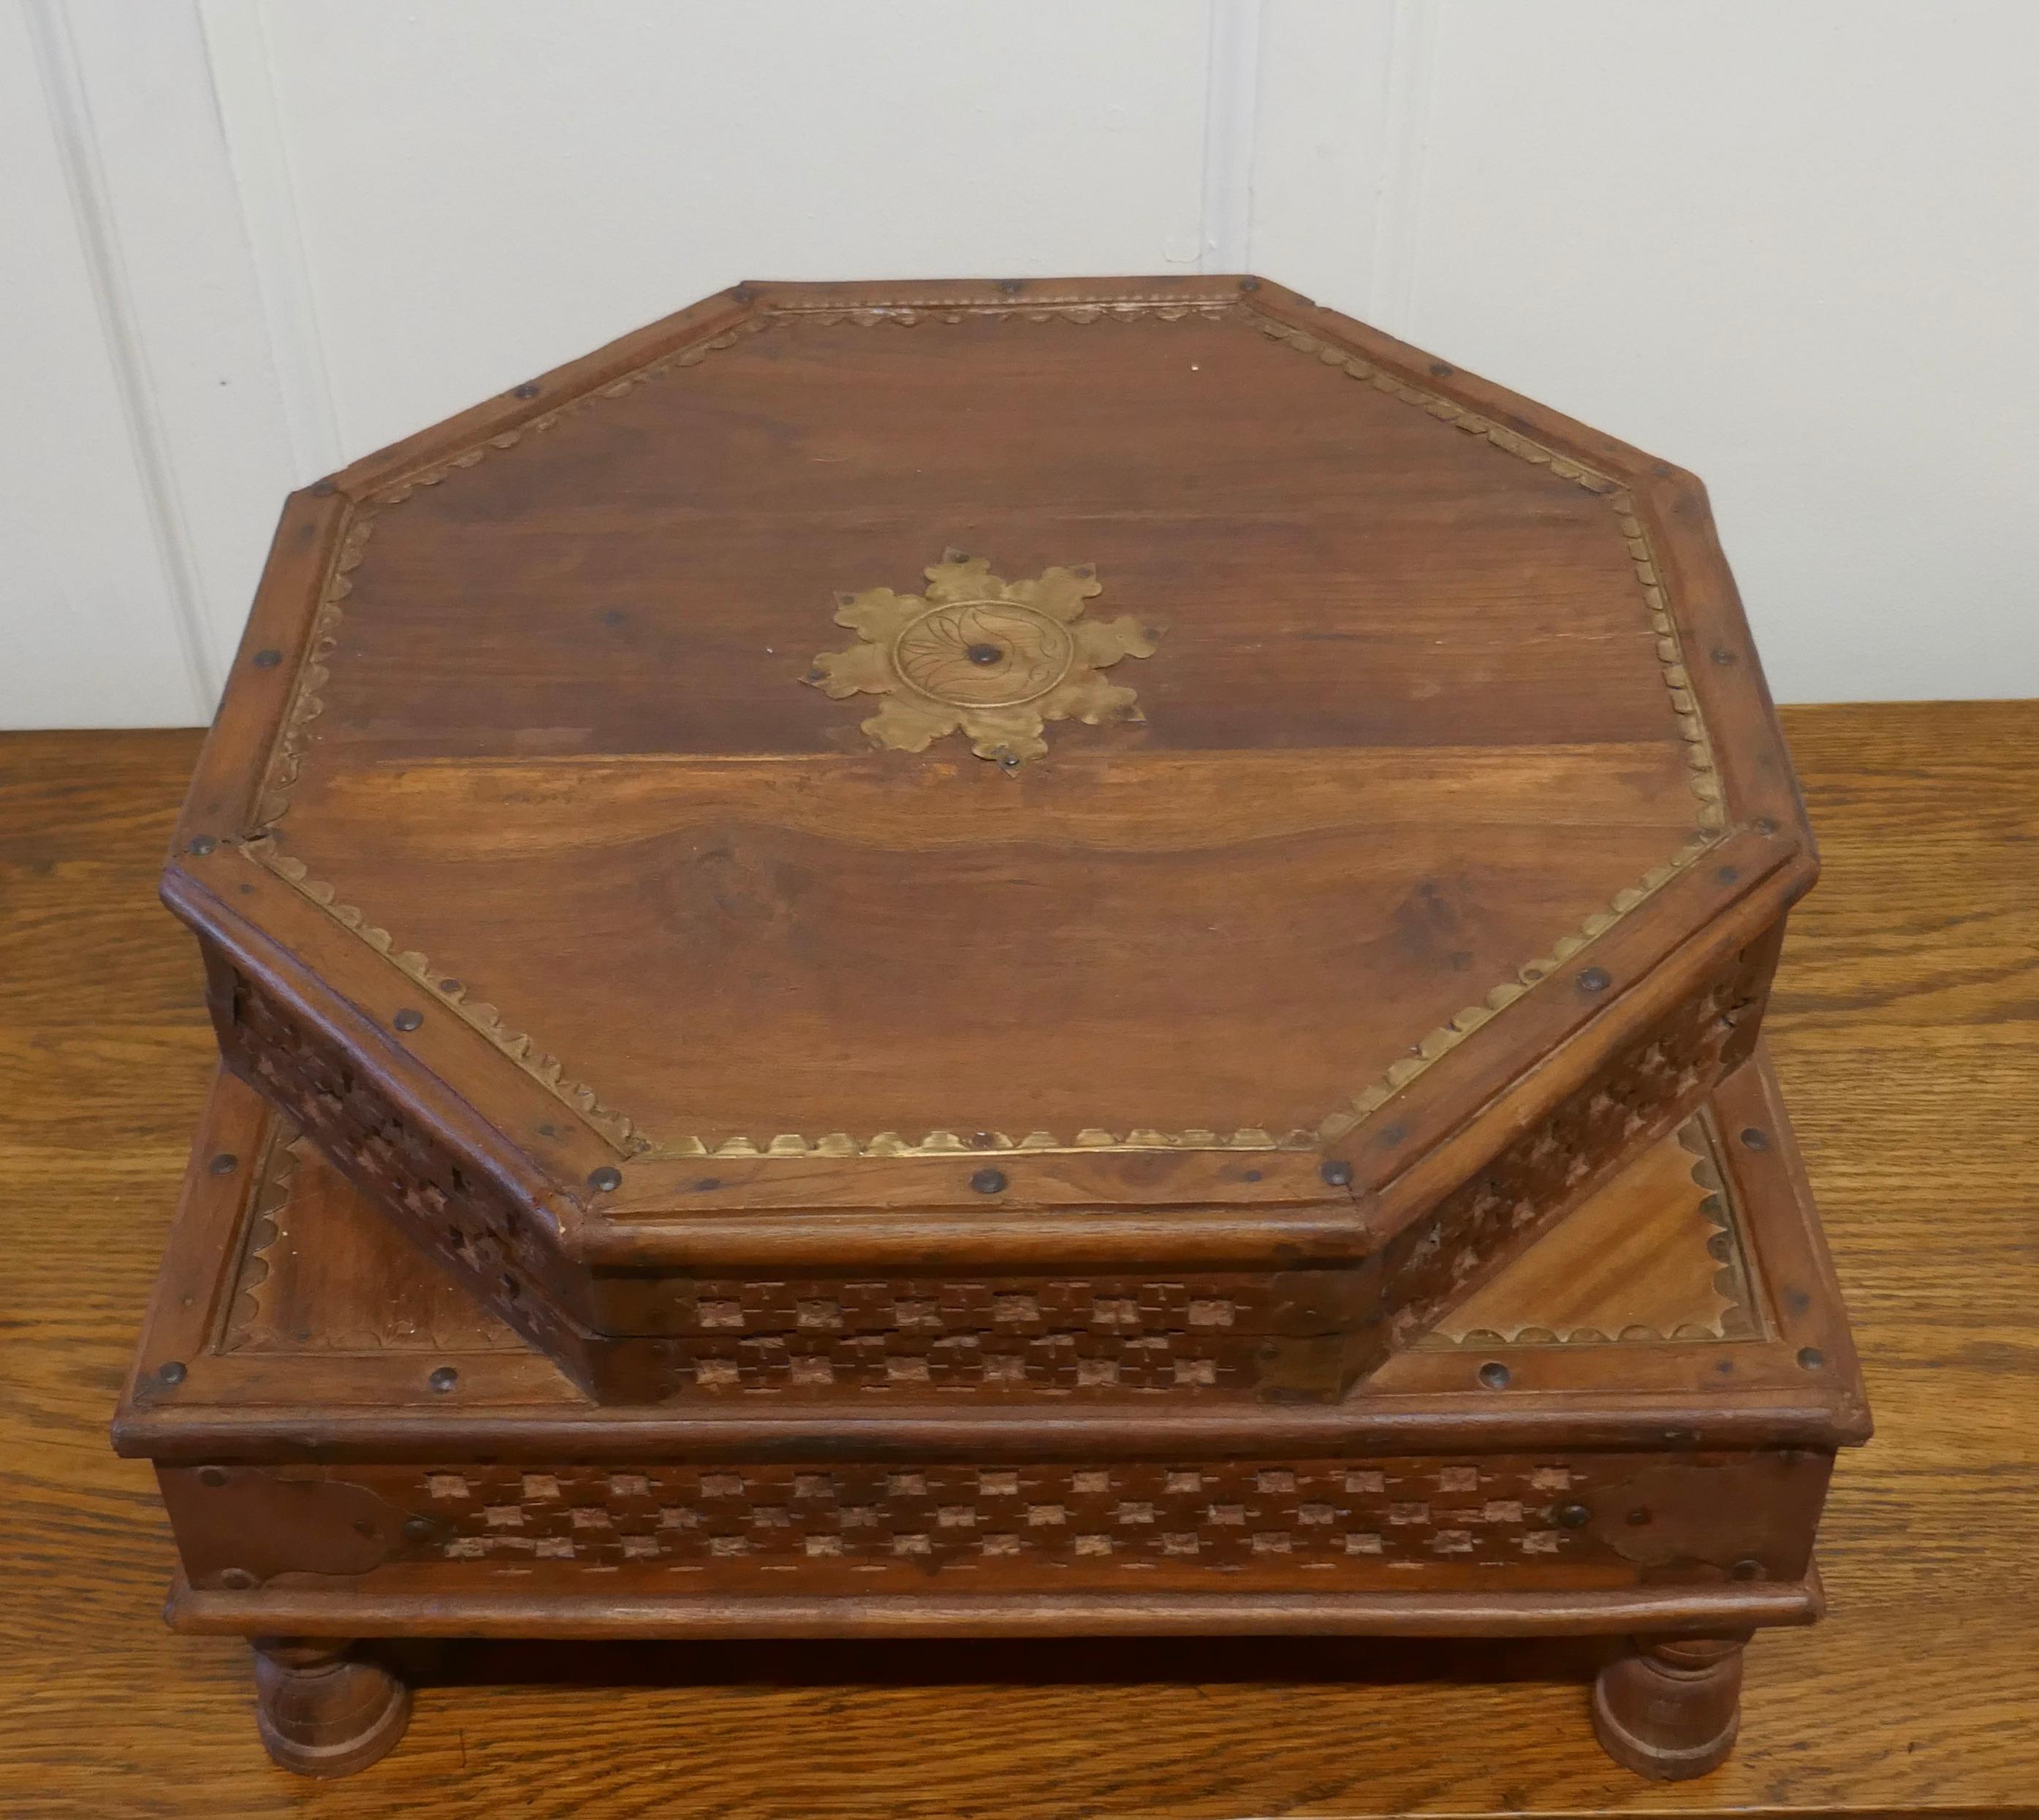 Double height carved Indian box

An unusual piece with 2 levels, the top of the box in the octagonal shape has an opening lid. The lower is rectangular and it stands on small feet
The box is carved and decorated with brass inlay 
The box is 10”